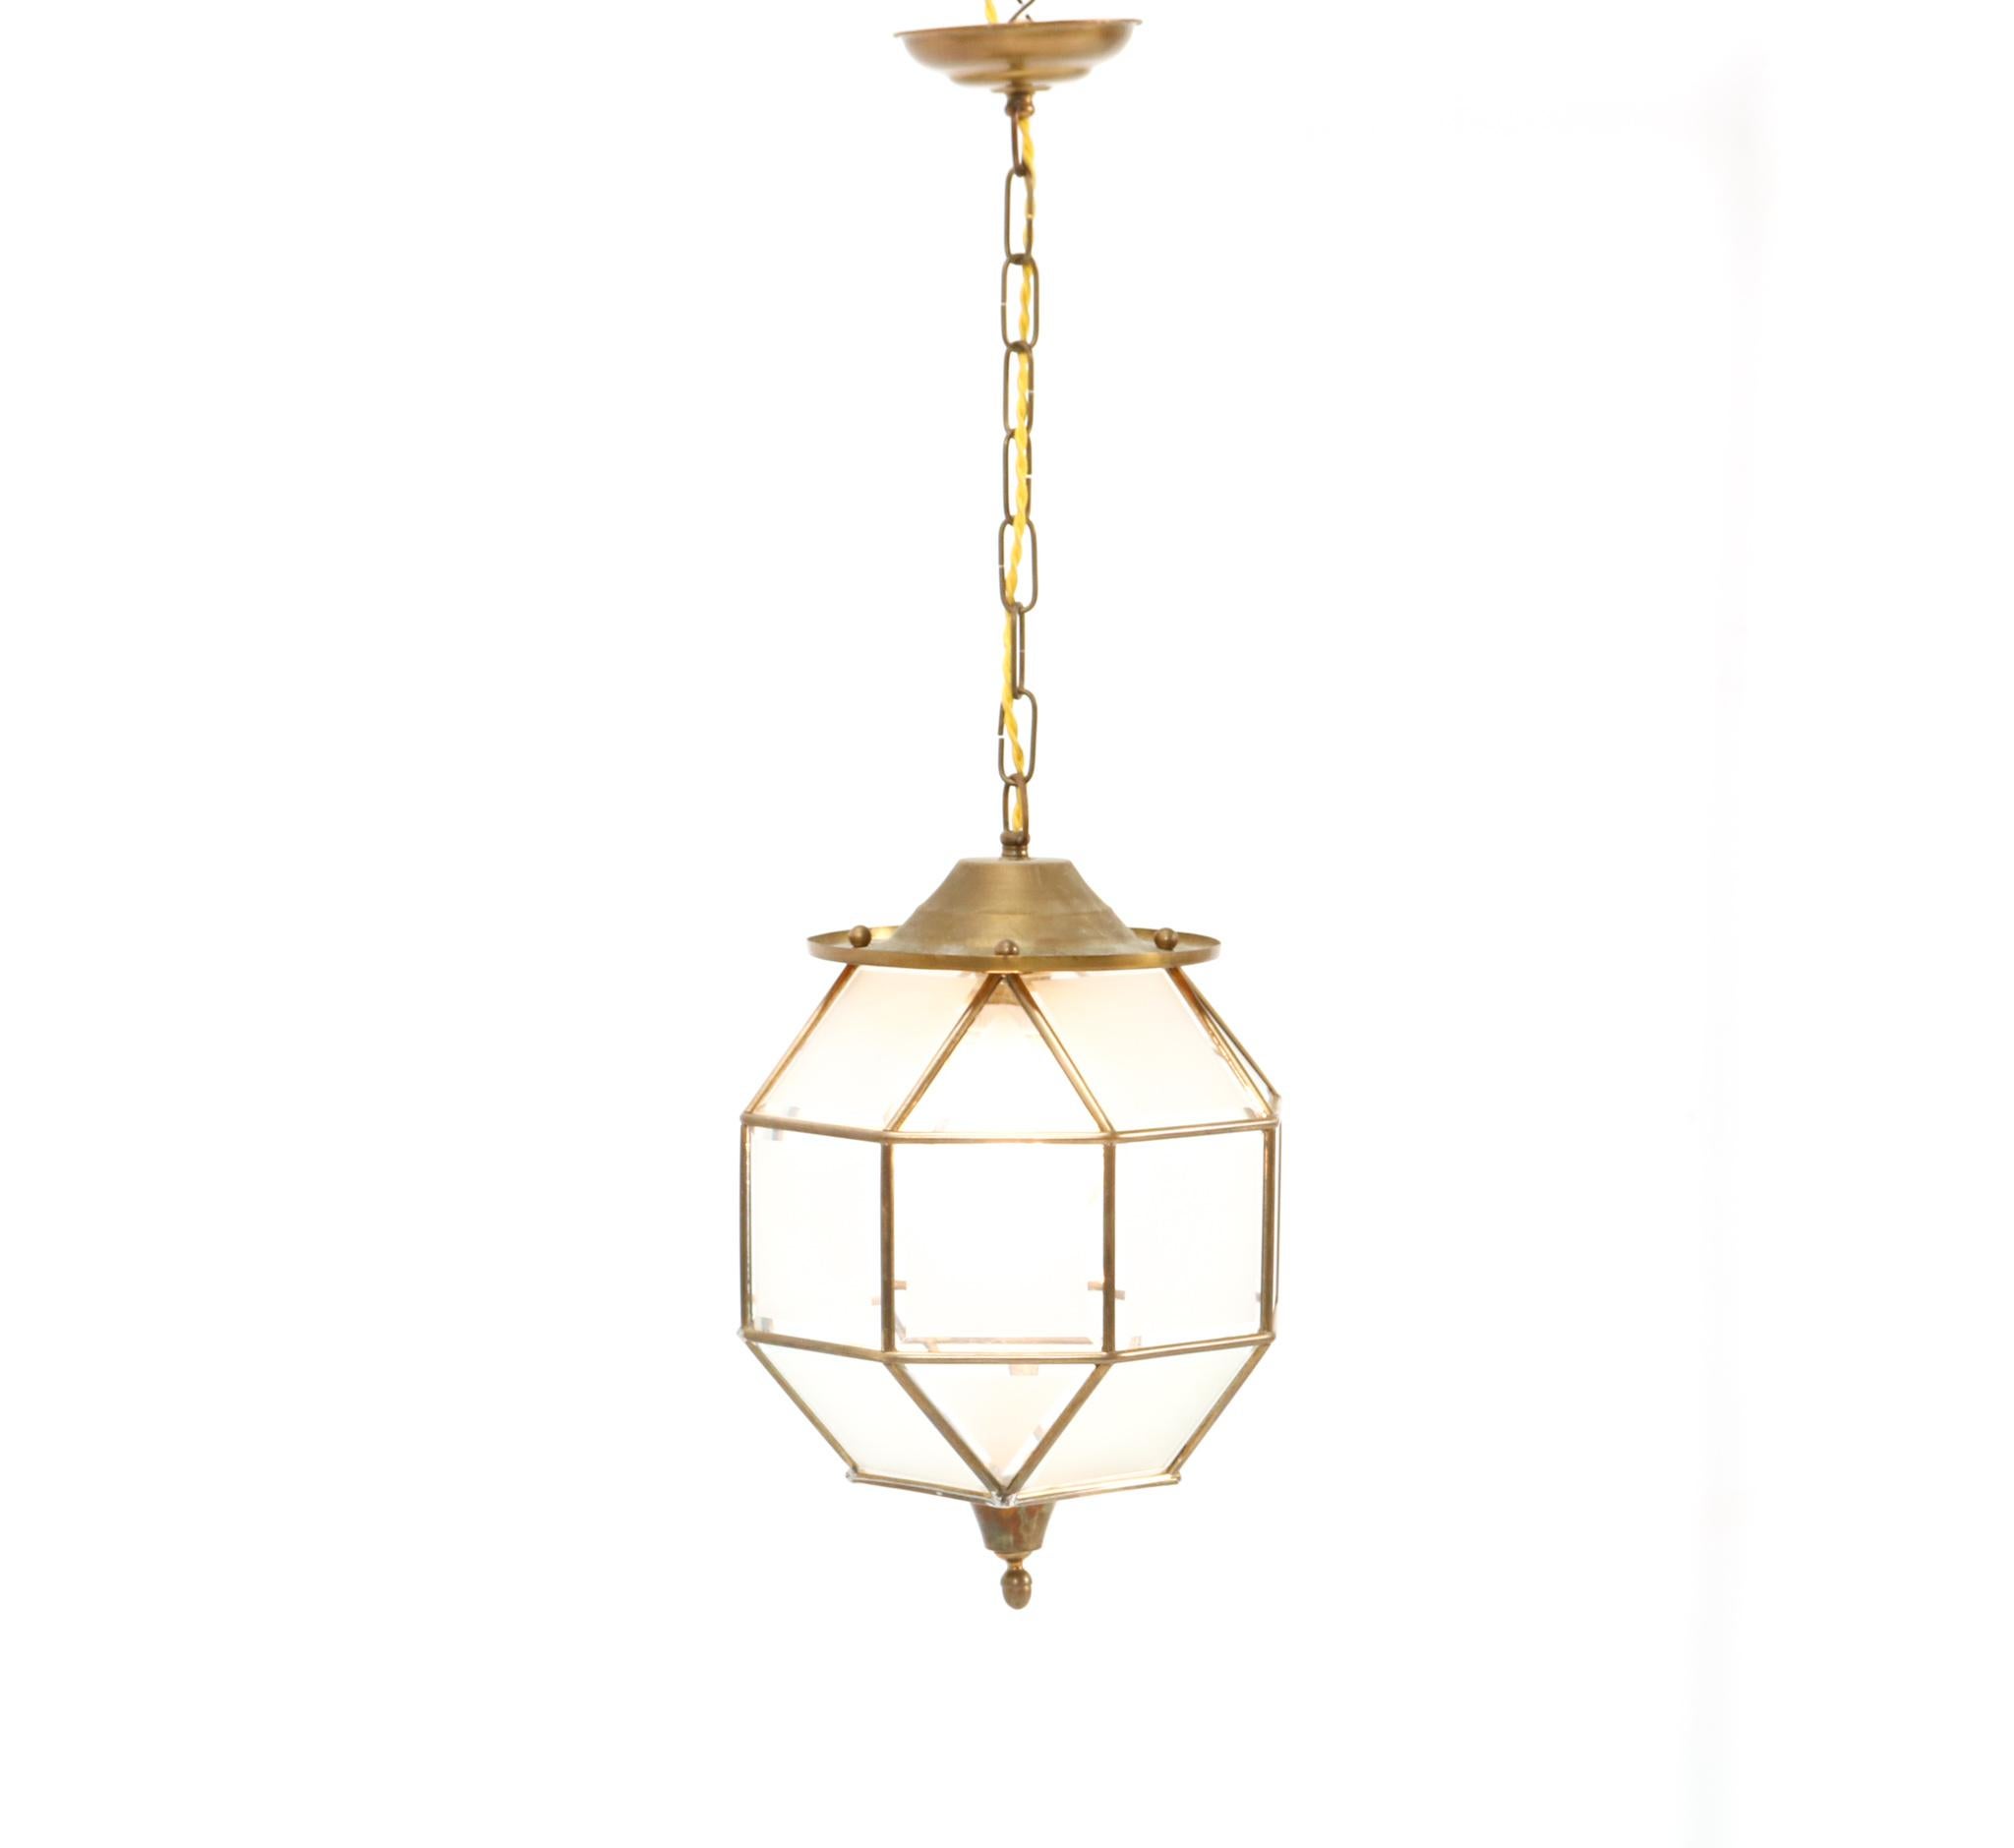 Stunning and rare Art Deco lantern.
Striking Dutch design from the 1920s.
Brass frame and chain.
Original cut glass which has no cracks or hidden damages.
Rewired with one original socket for E-27 light bulb.
This wonderful Art Deco lantern is